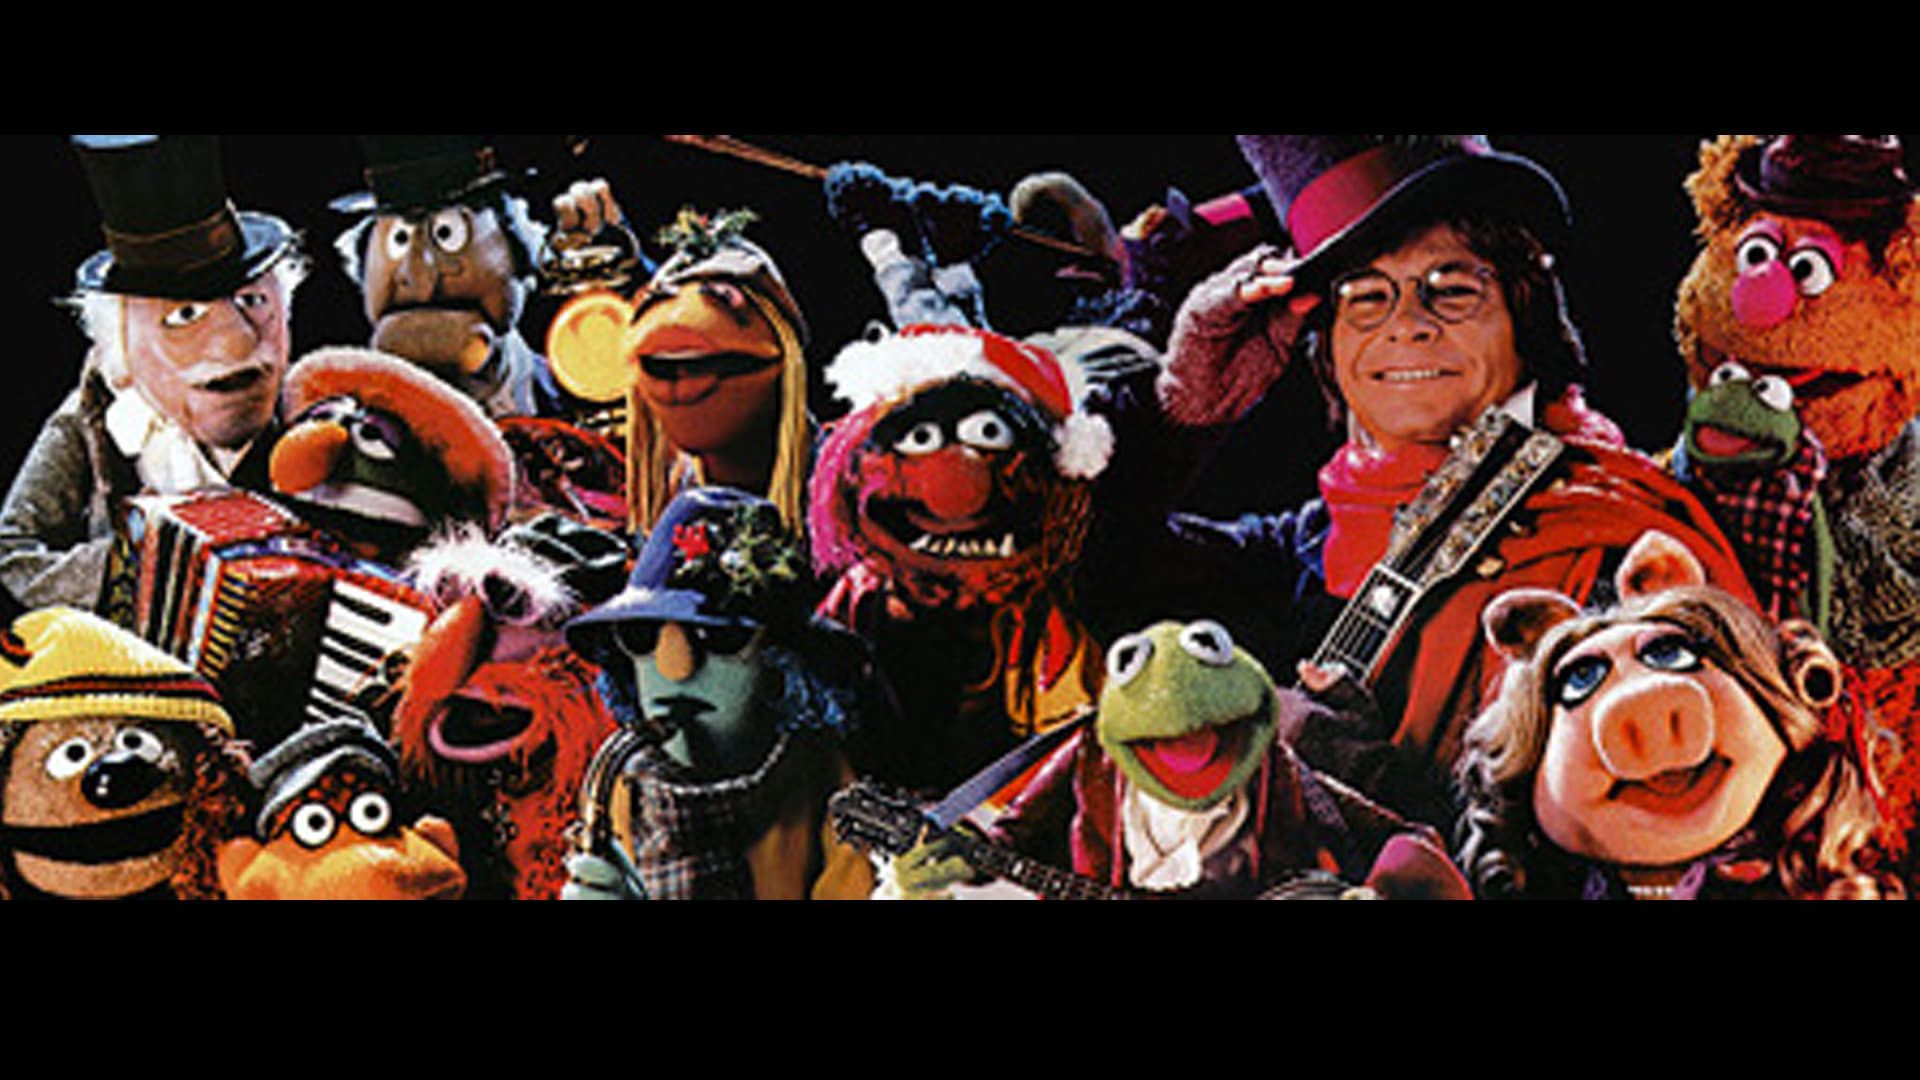 John Denver and the Muppets: A Christmas Together Backdrop